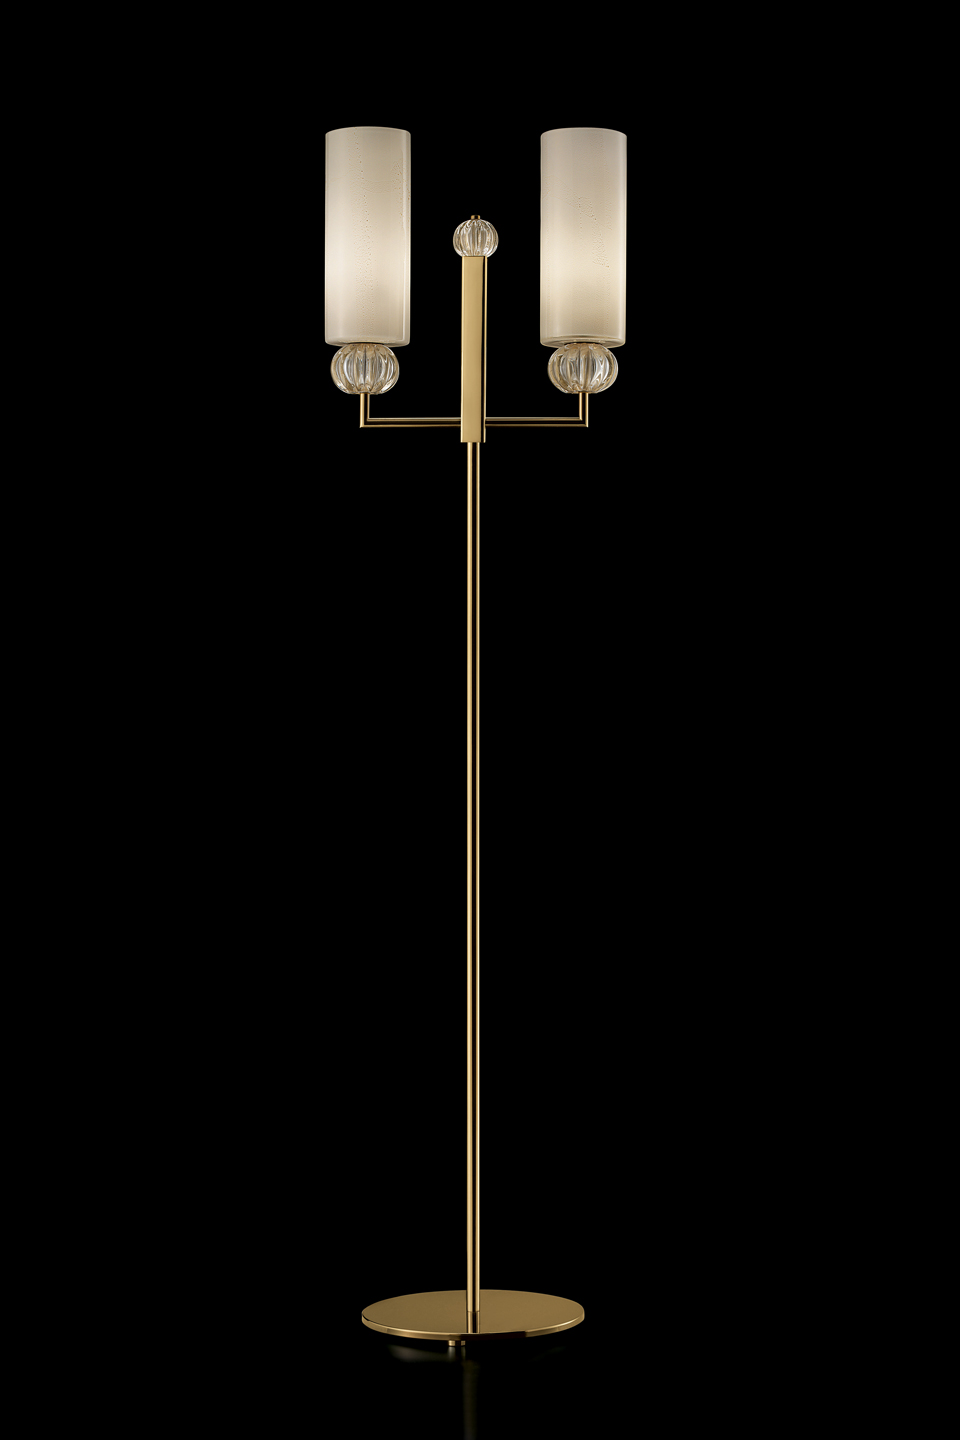 Gallia classic floor lamp with beige opal diffuser. Barovier&Toso. 